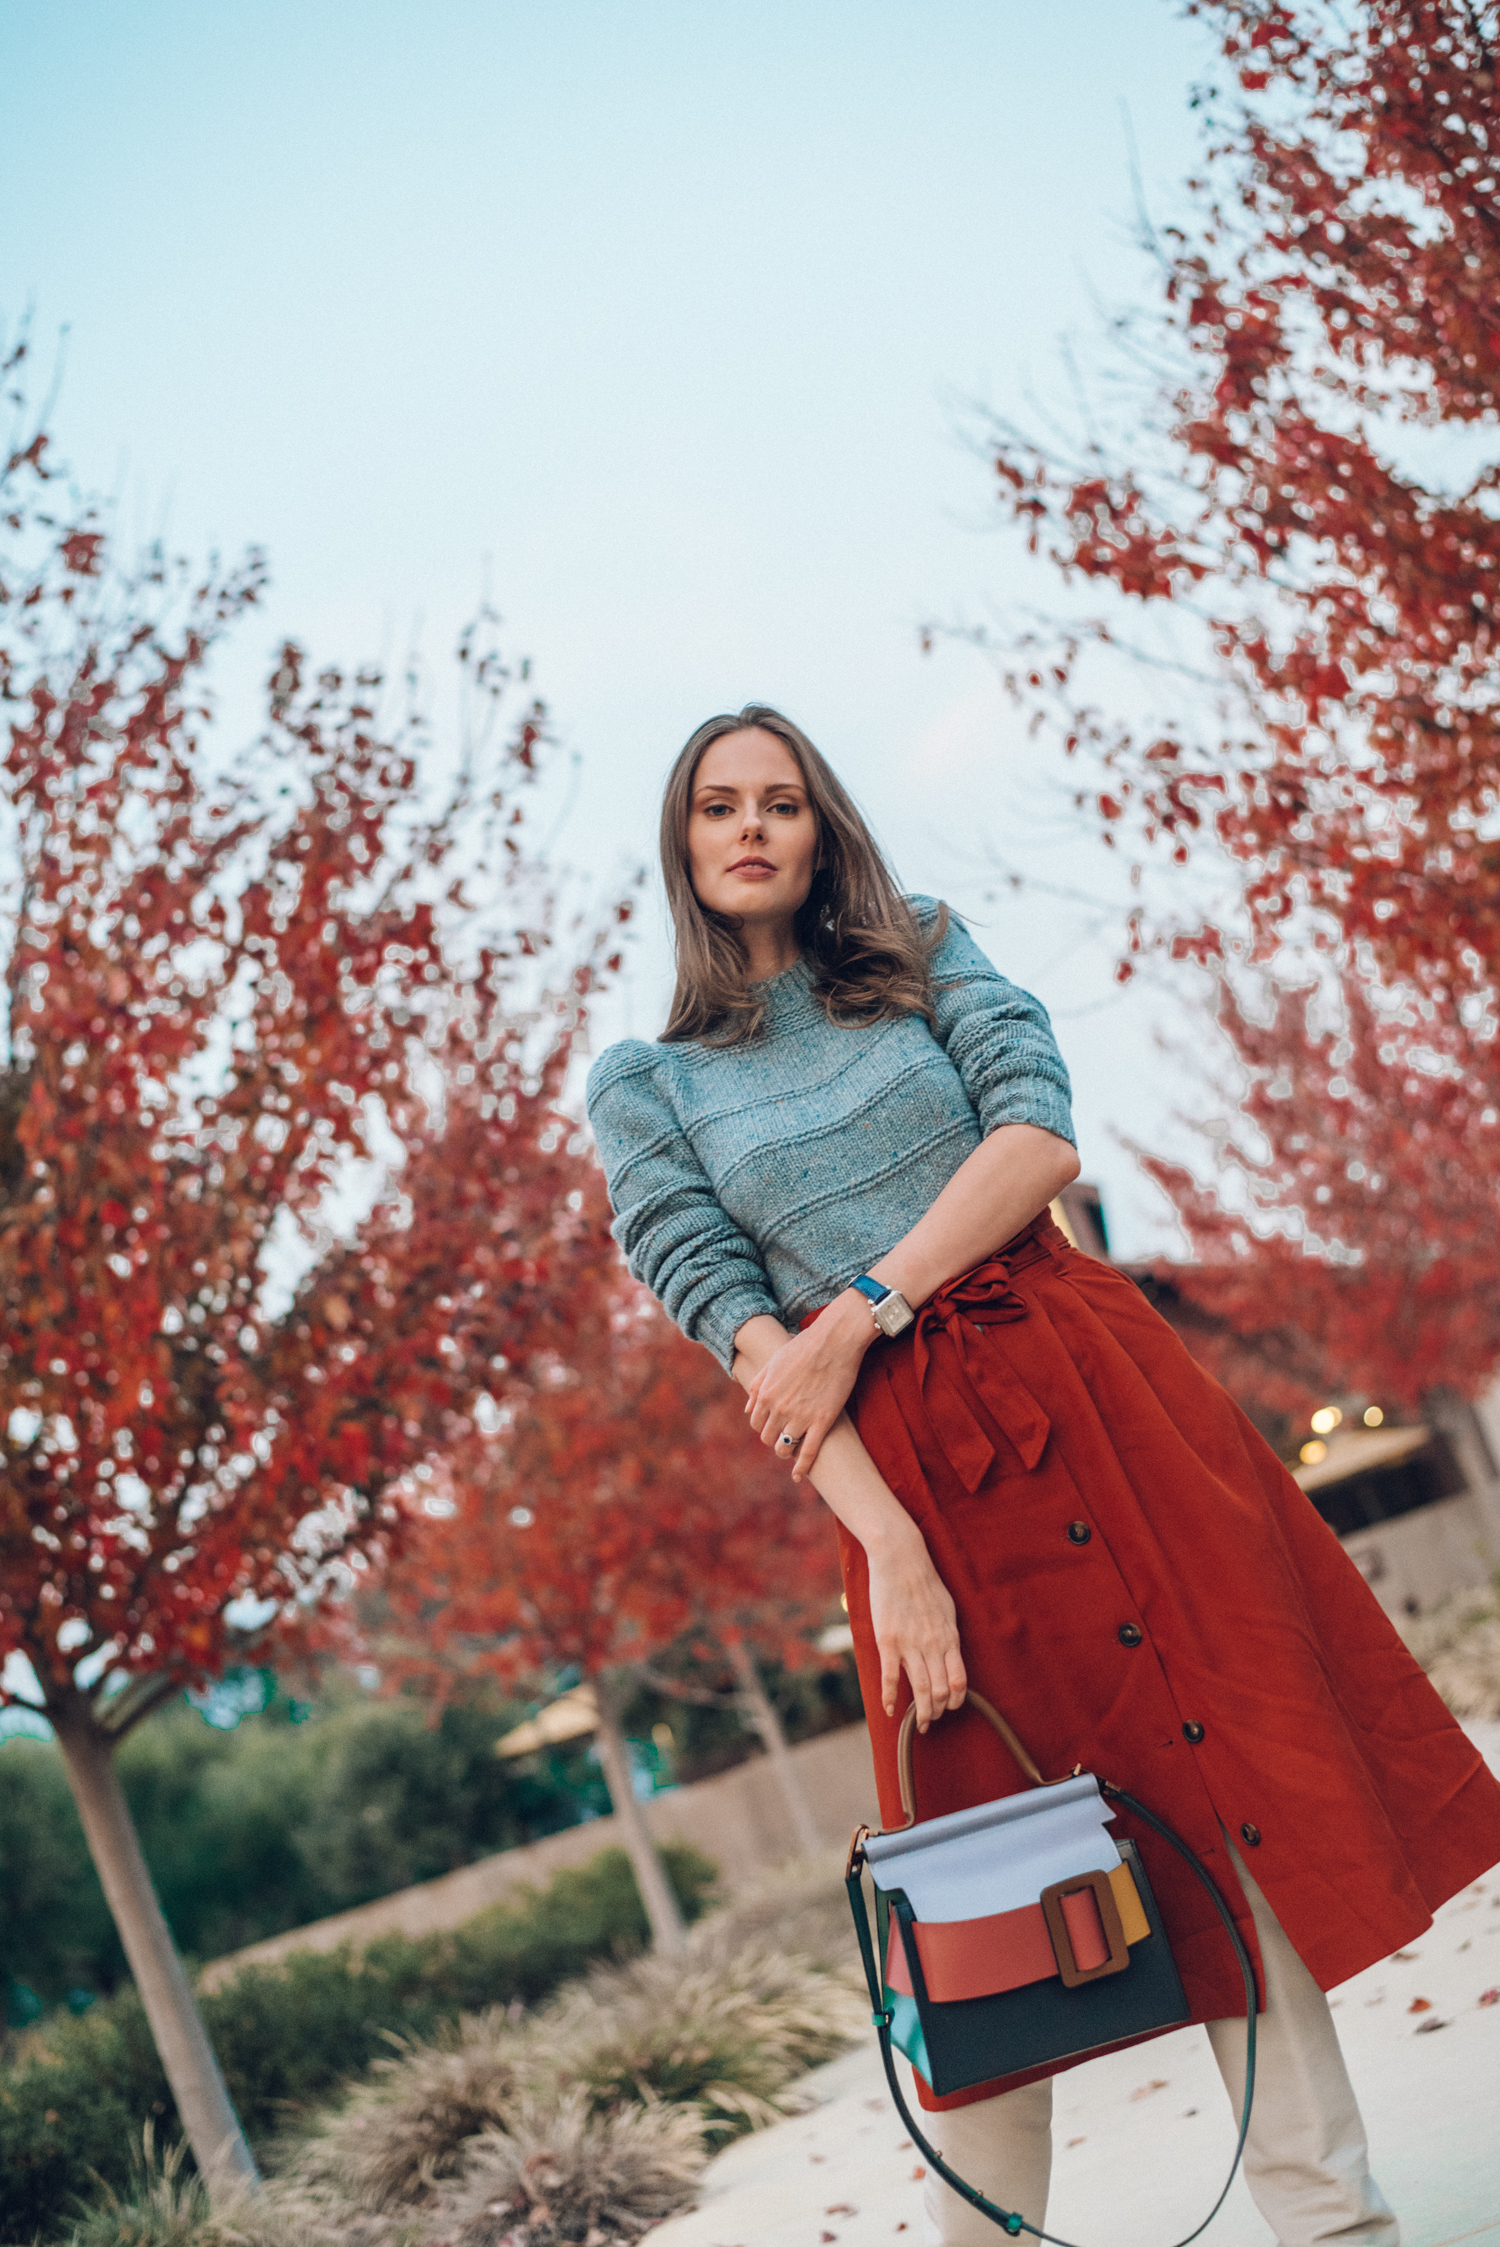 Alyssa Campanella of The A List blog visits B Cellars for Cabernet season 2018 wearing Sezane Zia skirt, What For ivory boots, and Boyy Boutique karl bag